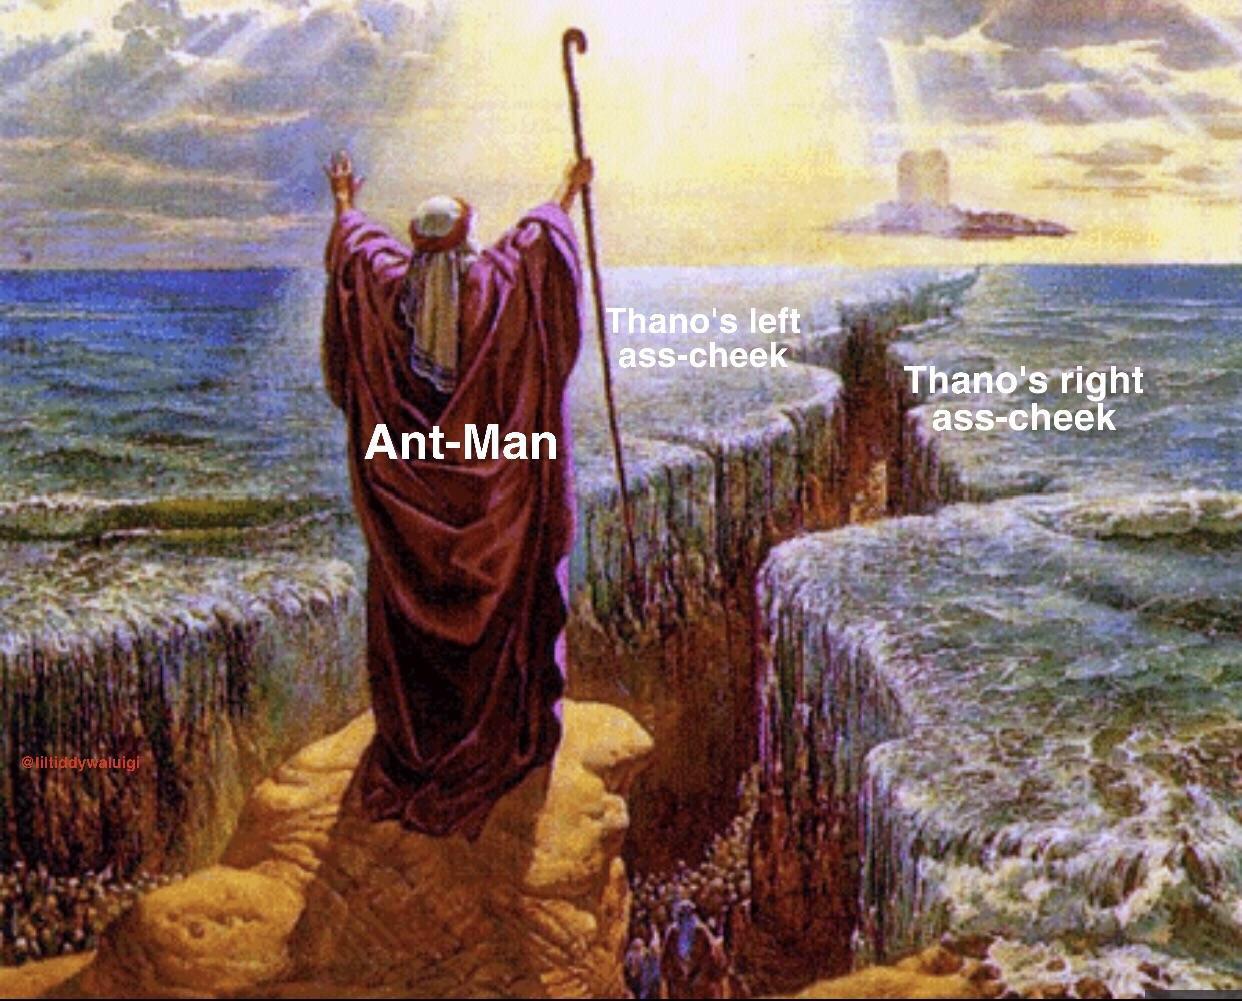 Funny meme of Moses parting the red sea but the sea is Thanos' butt and moses is Ant-man